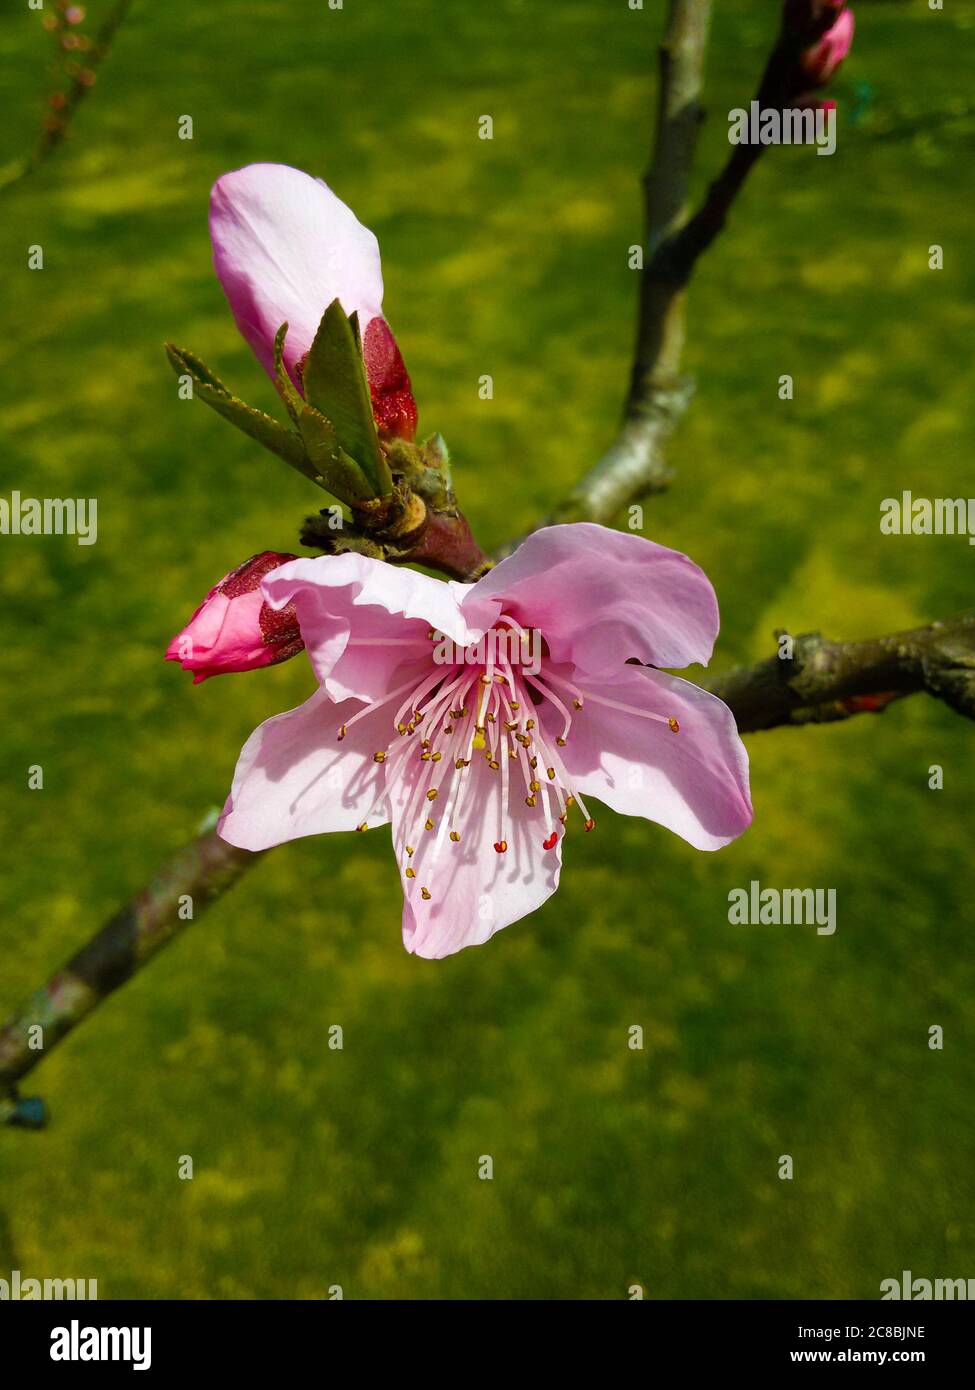 The Pink Peach flower blossom under the sun in April while it is sunny; Stock Photo